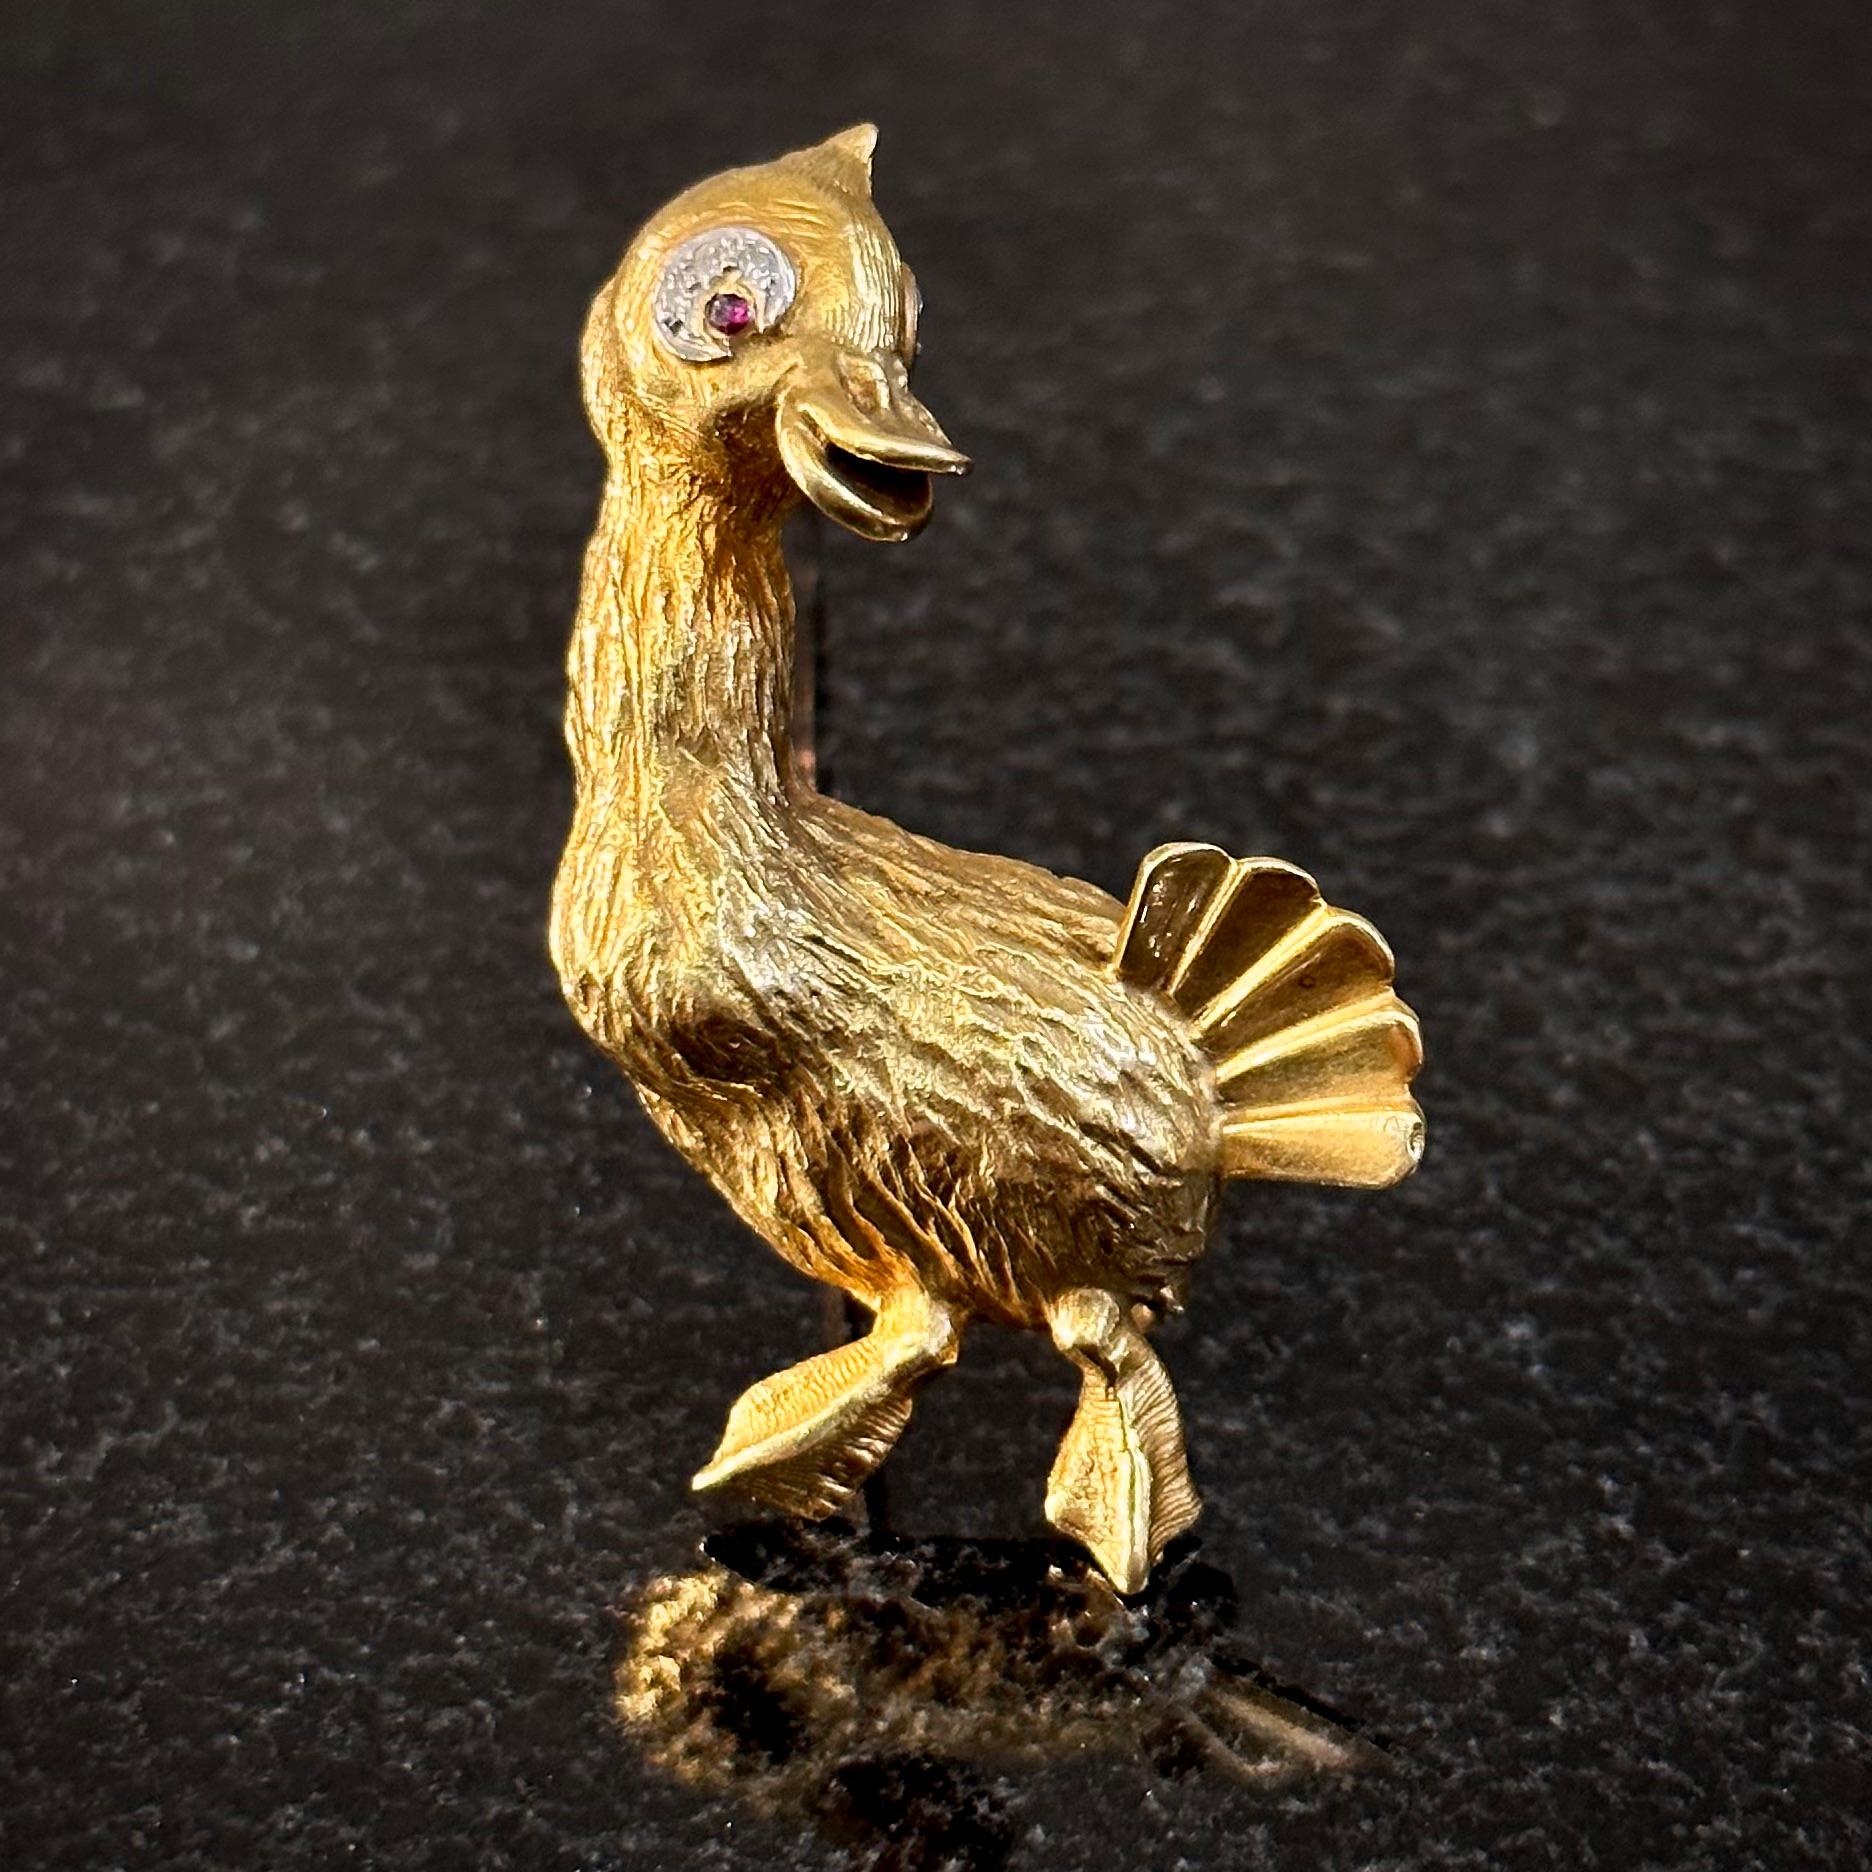 Ben Rosenfeld Mid-Century diamond and ruby duck brooch in 18kt yellow and white gold, English, 1960s. Made in 1961 and modelled as a mallard duck, the animal’s body in textured gold with a polished tail, the head and feet embellished with a